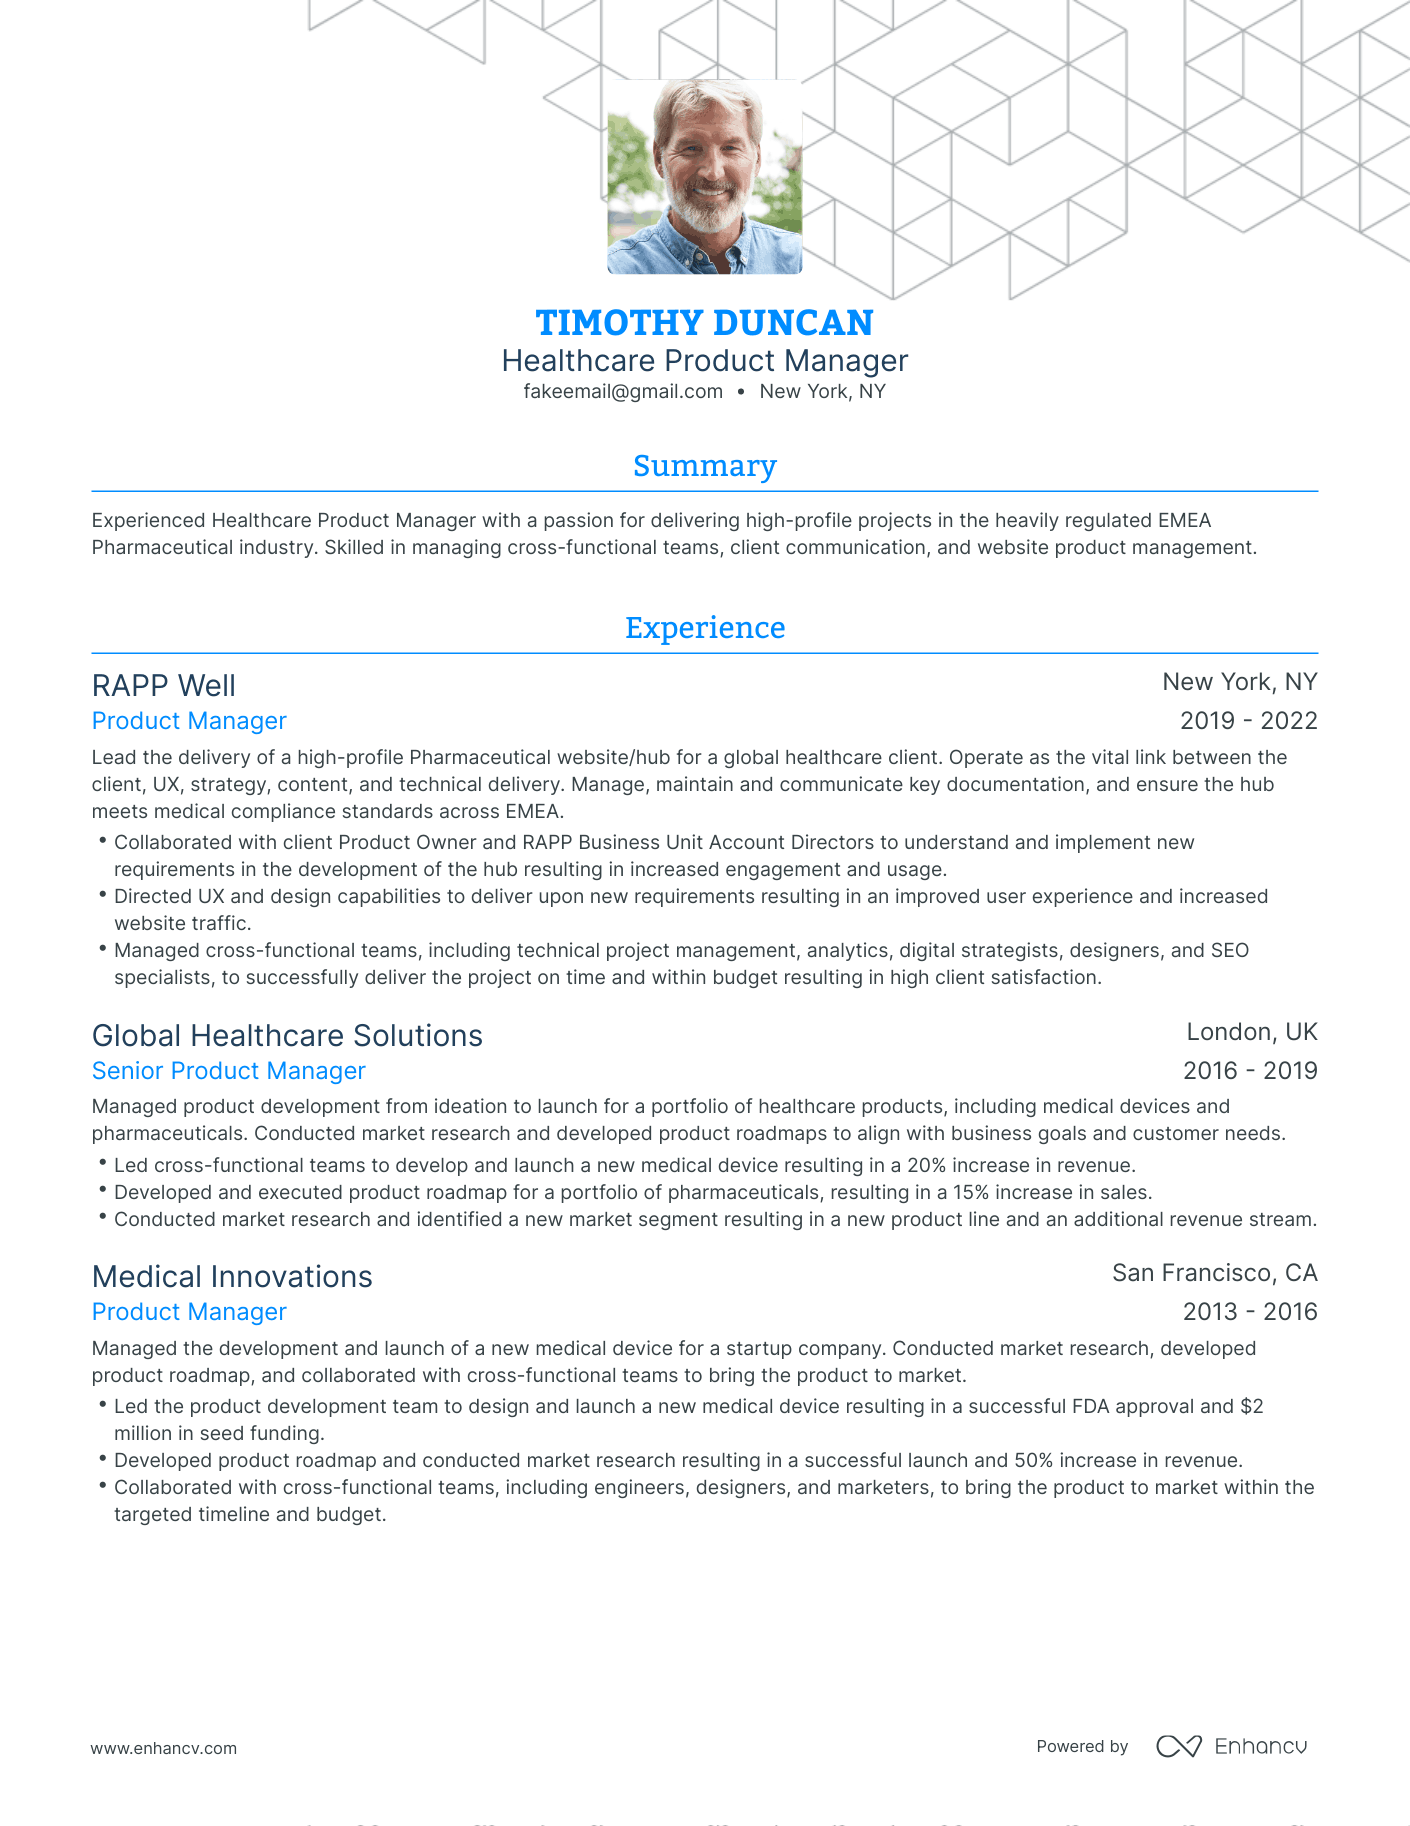 Traditional Healthcare Product Manager Resume Template